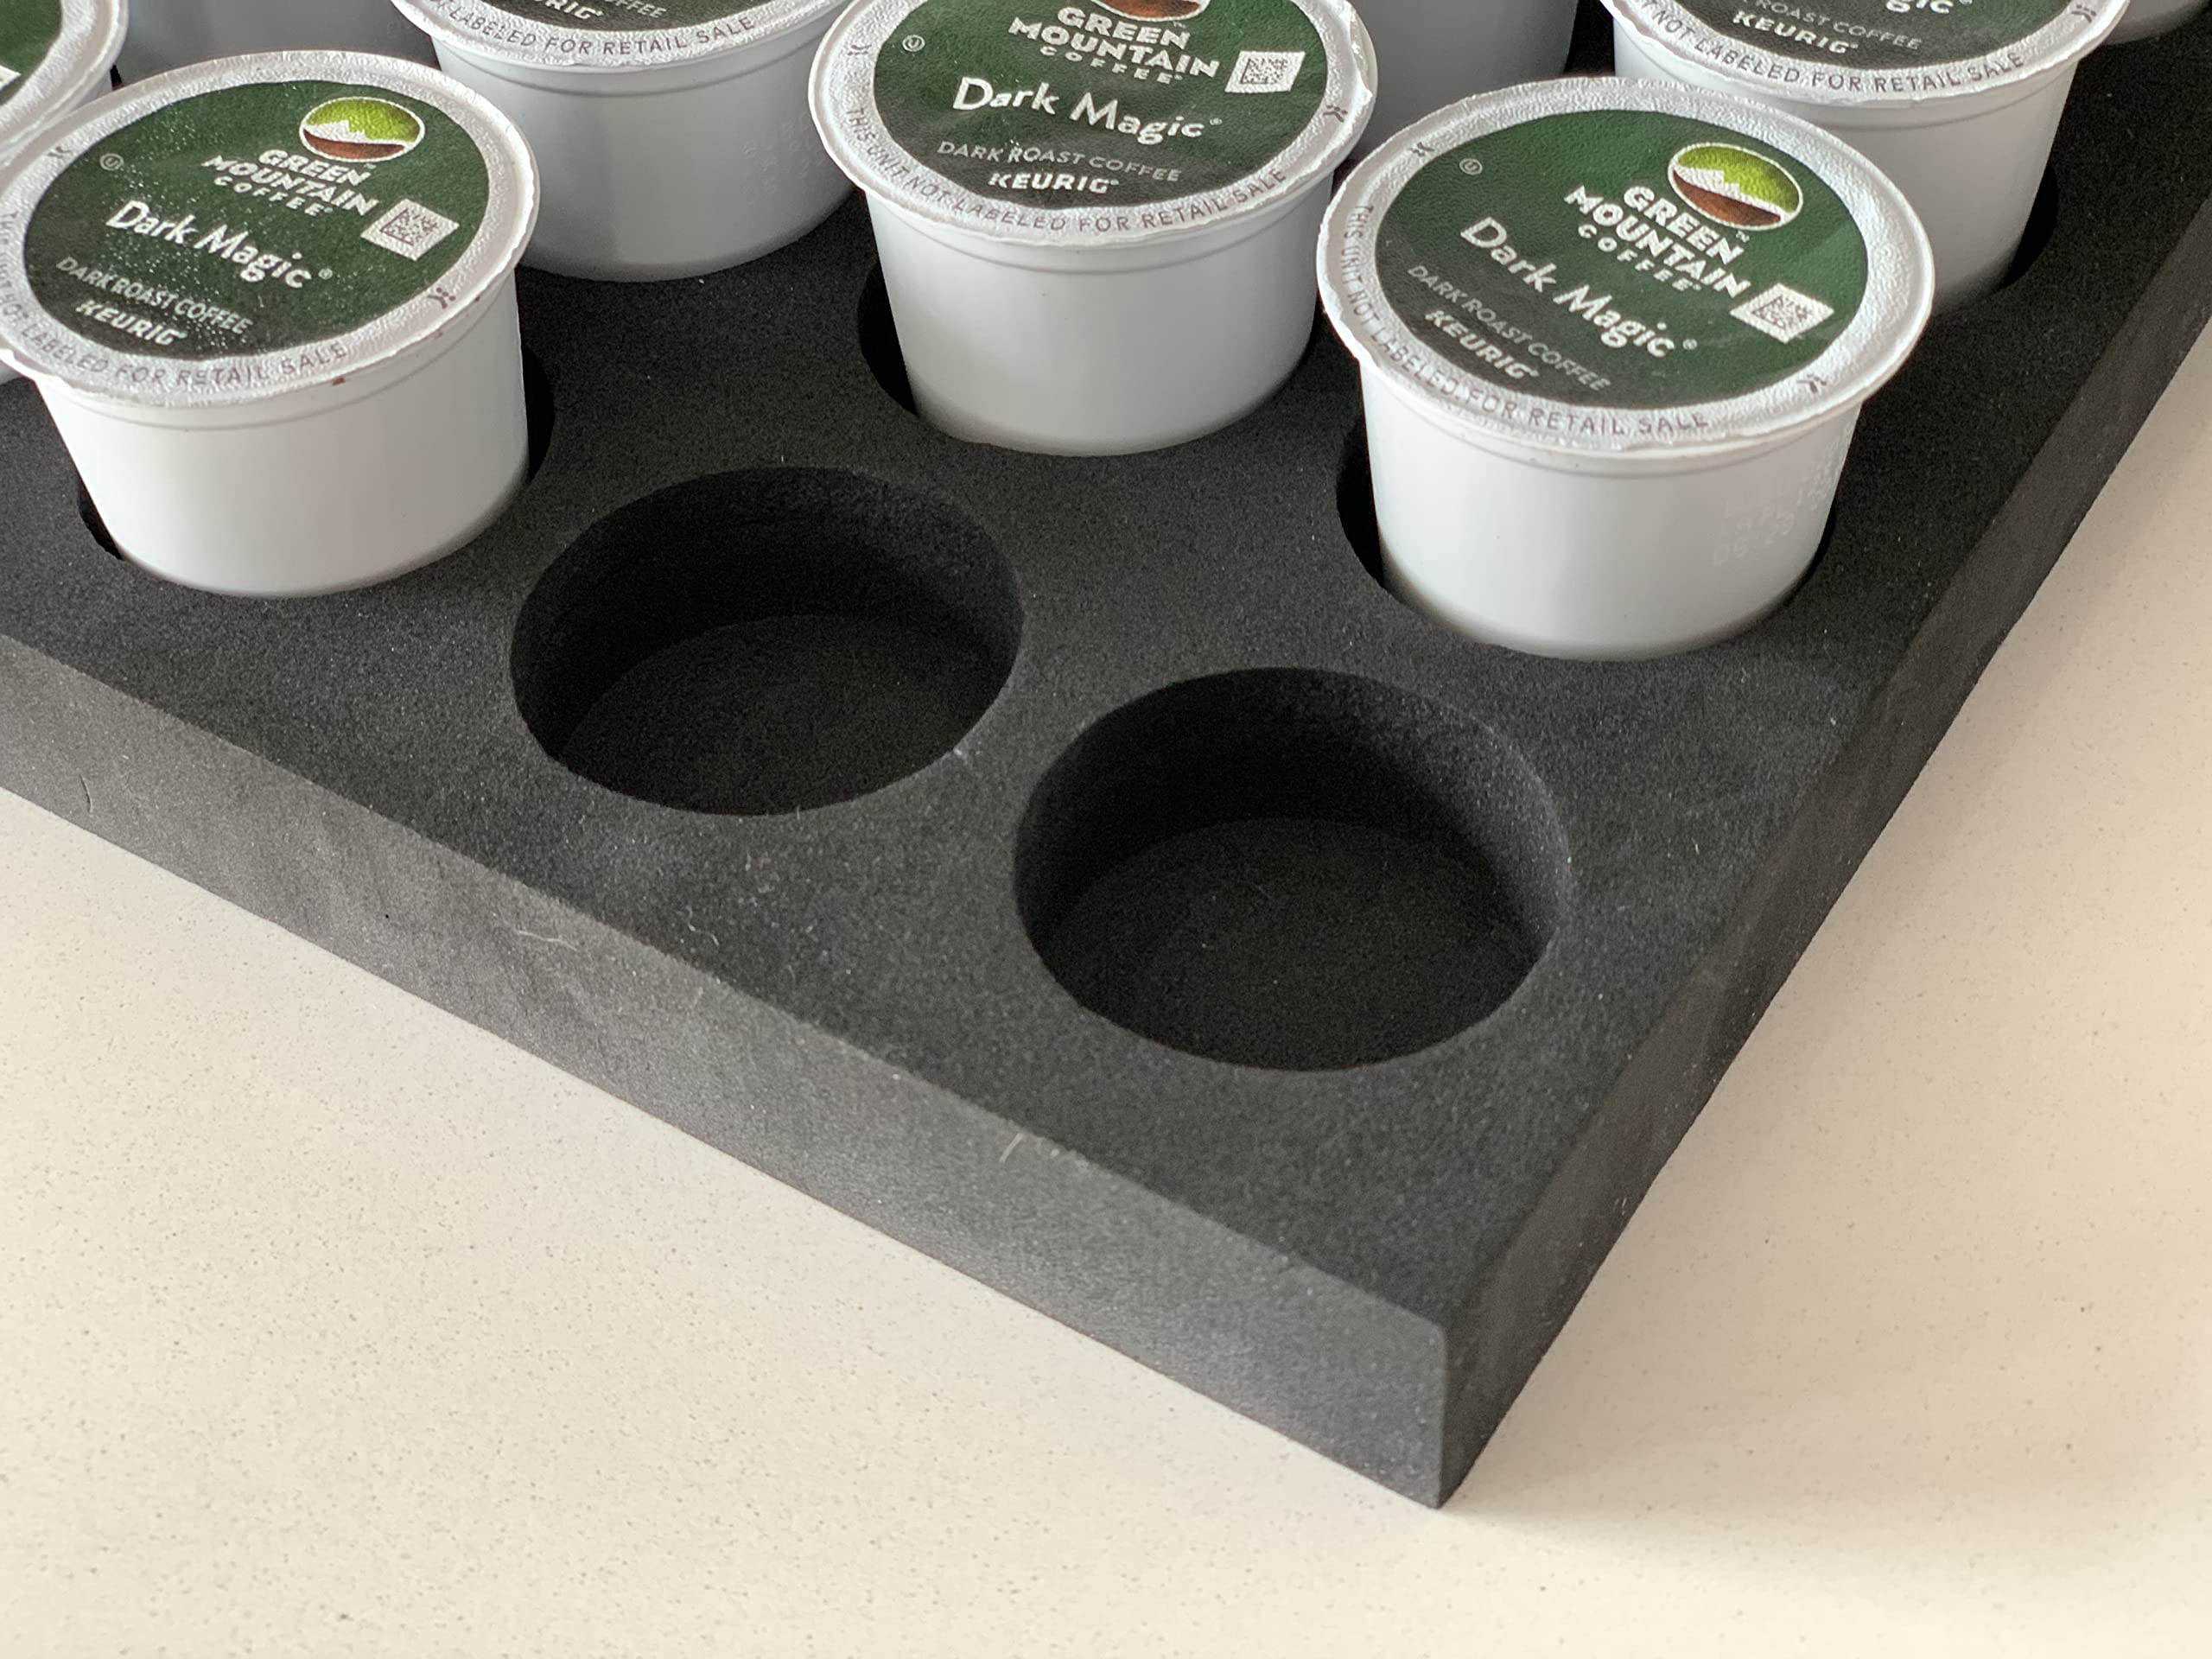 Coffee Pod Storage Tray, Organizer Compatible with Keurig K Cup For Drawer or Countertop 35 Pod Capacity